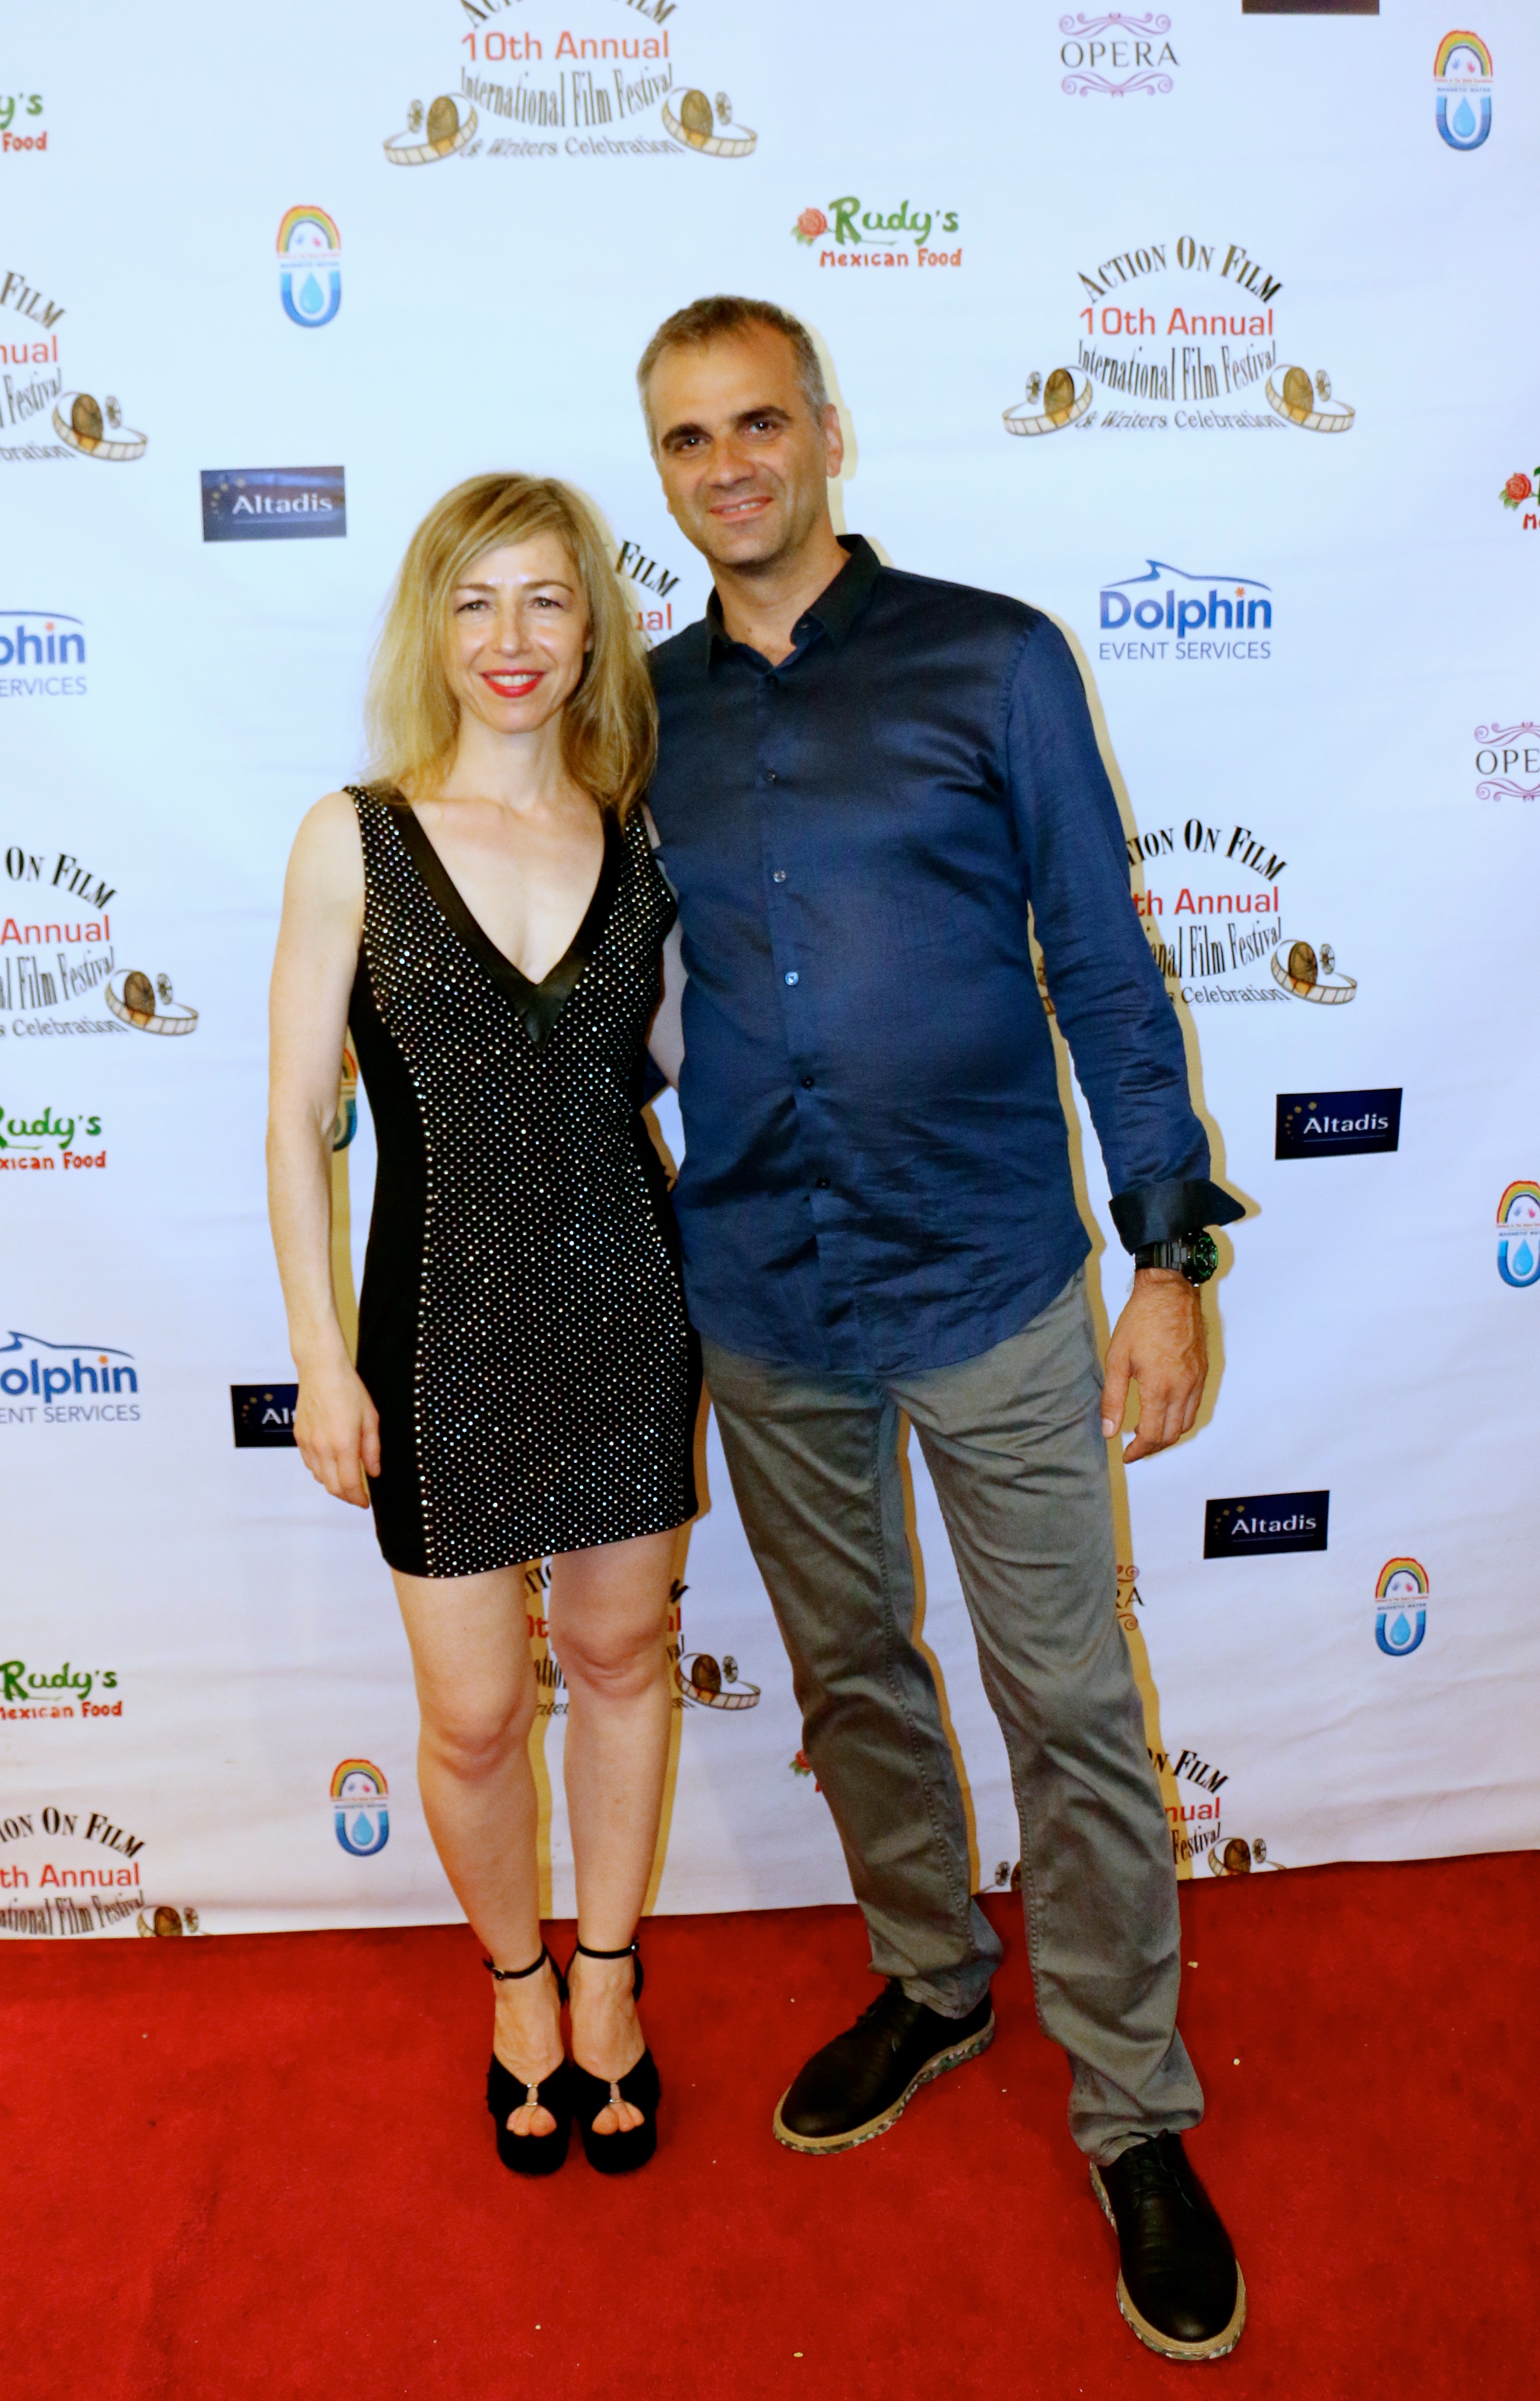 With Adrian Roman at the Action ON Film Festival